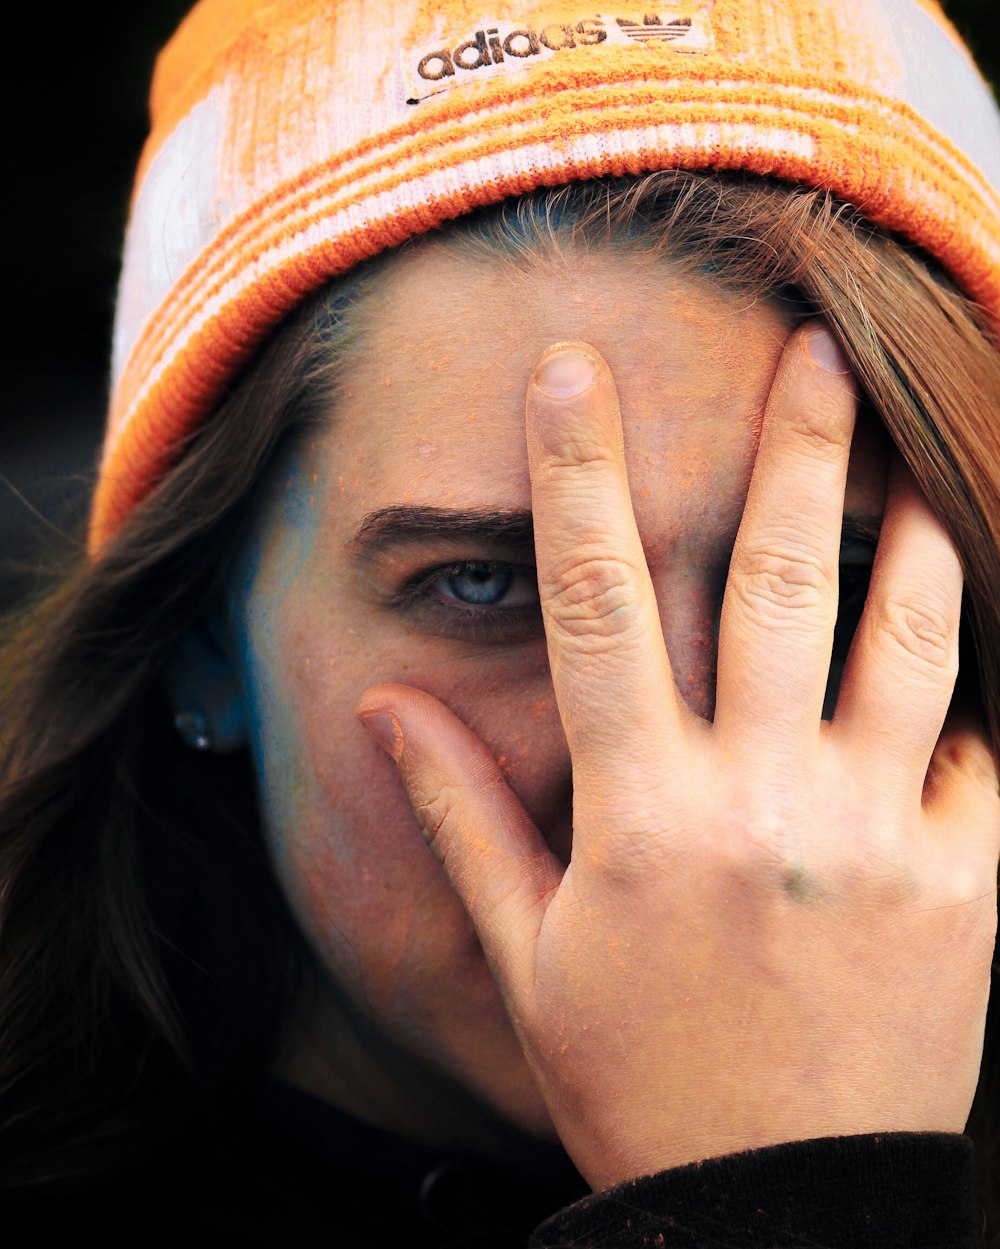 woman wearing adidas cap holding her face